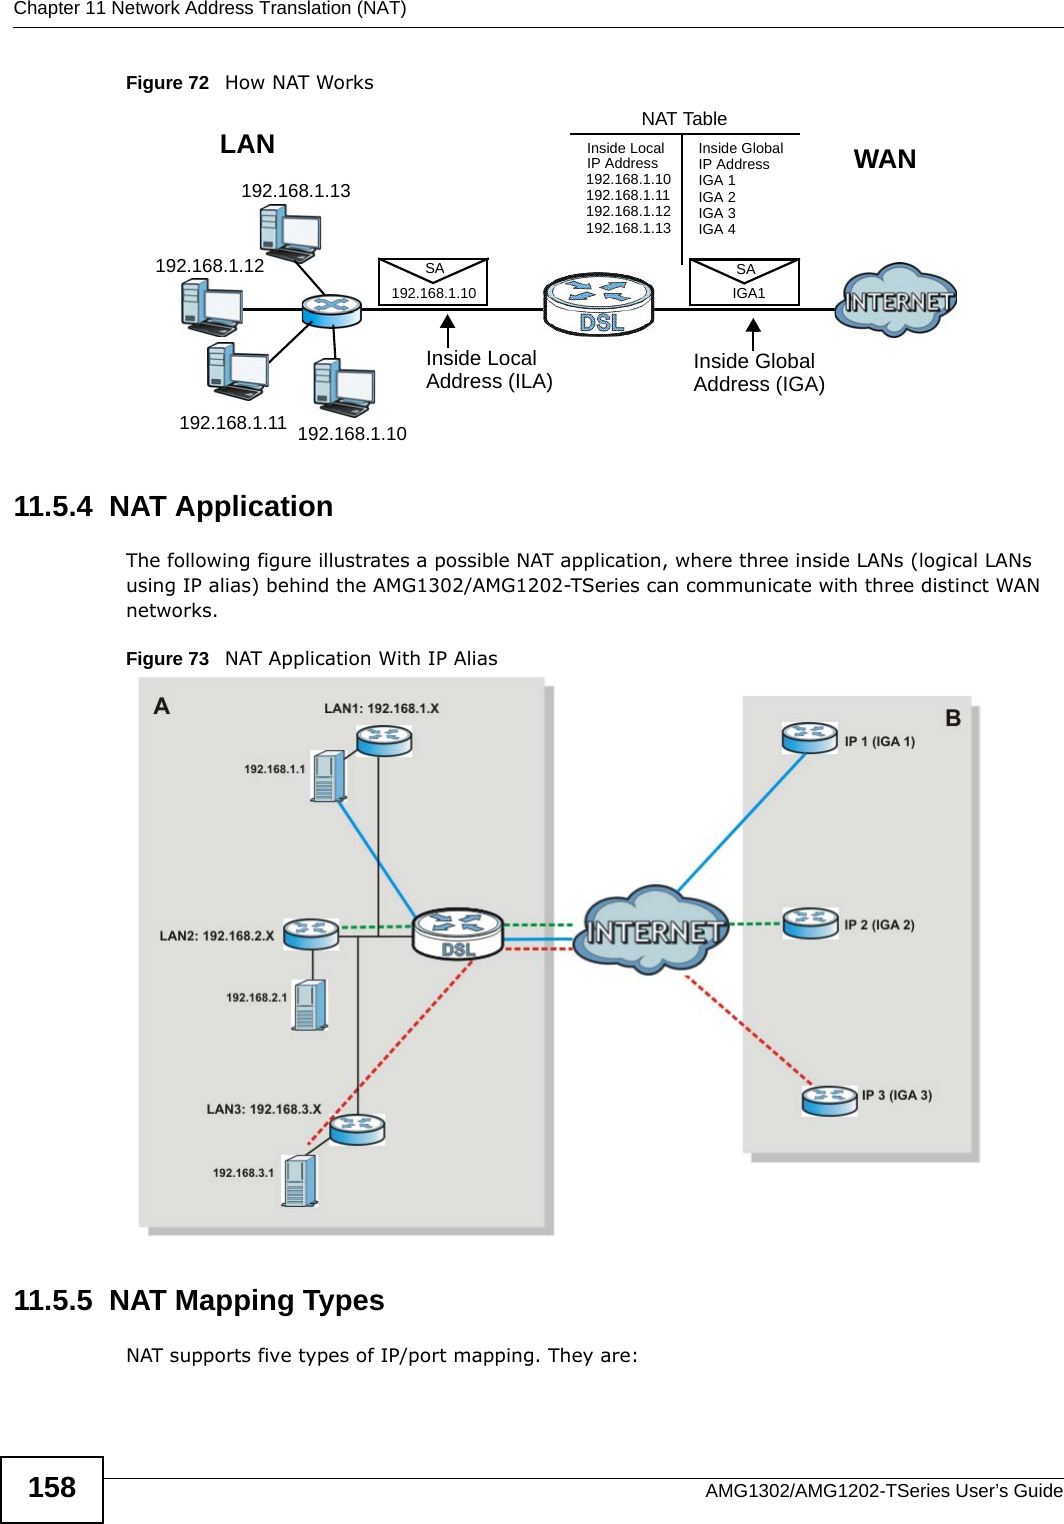 Chapter 11 Network Address Translation (NAT)AMG1302/AMG1202-TSeries User’s Guide158Figure 72   How NAT Works11.5.4  NAT ApplicationThe following figure illustrates a possible NAT application, where three inside LANs (logical LANs using IP alias) behind the AMG1302/AMG1202-TSeries can communicate with three distinct WAN networks.Figure 73   NAT Application With IP Alias11.5.5  NAT Mapping TypesNAT supports five types of IP/port mapping. They are:192.168.1.13192.168.1.10192.168.1.11192.168.1.12 SA192.168.1.10SAIGA1Inside LocalIP Address192.168.1.10192.168.1.11192.168.1.12192.168.1.13Inside Global IP AddressIGA 1IGA 2IGA 3IGA 4NAT TableWANLANInside LocalAddress (ILA) Inside GlobalAddress (IGA)